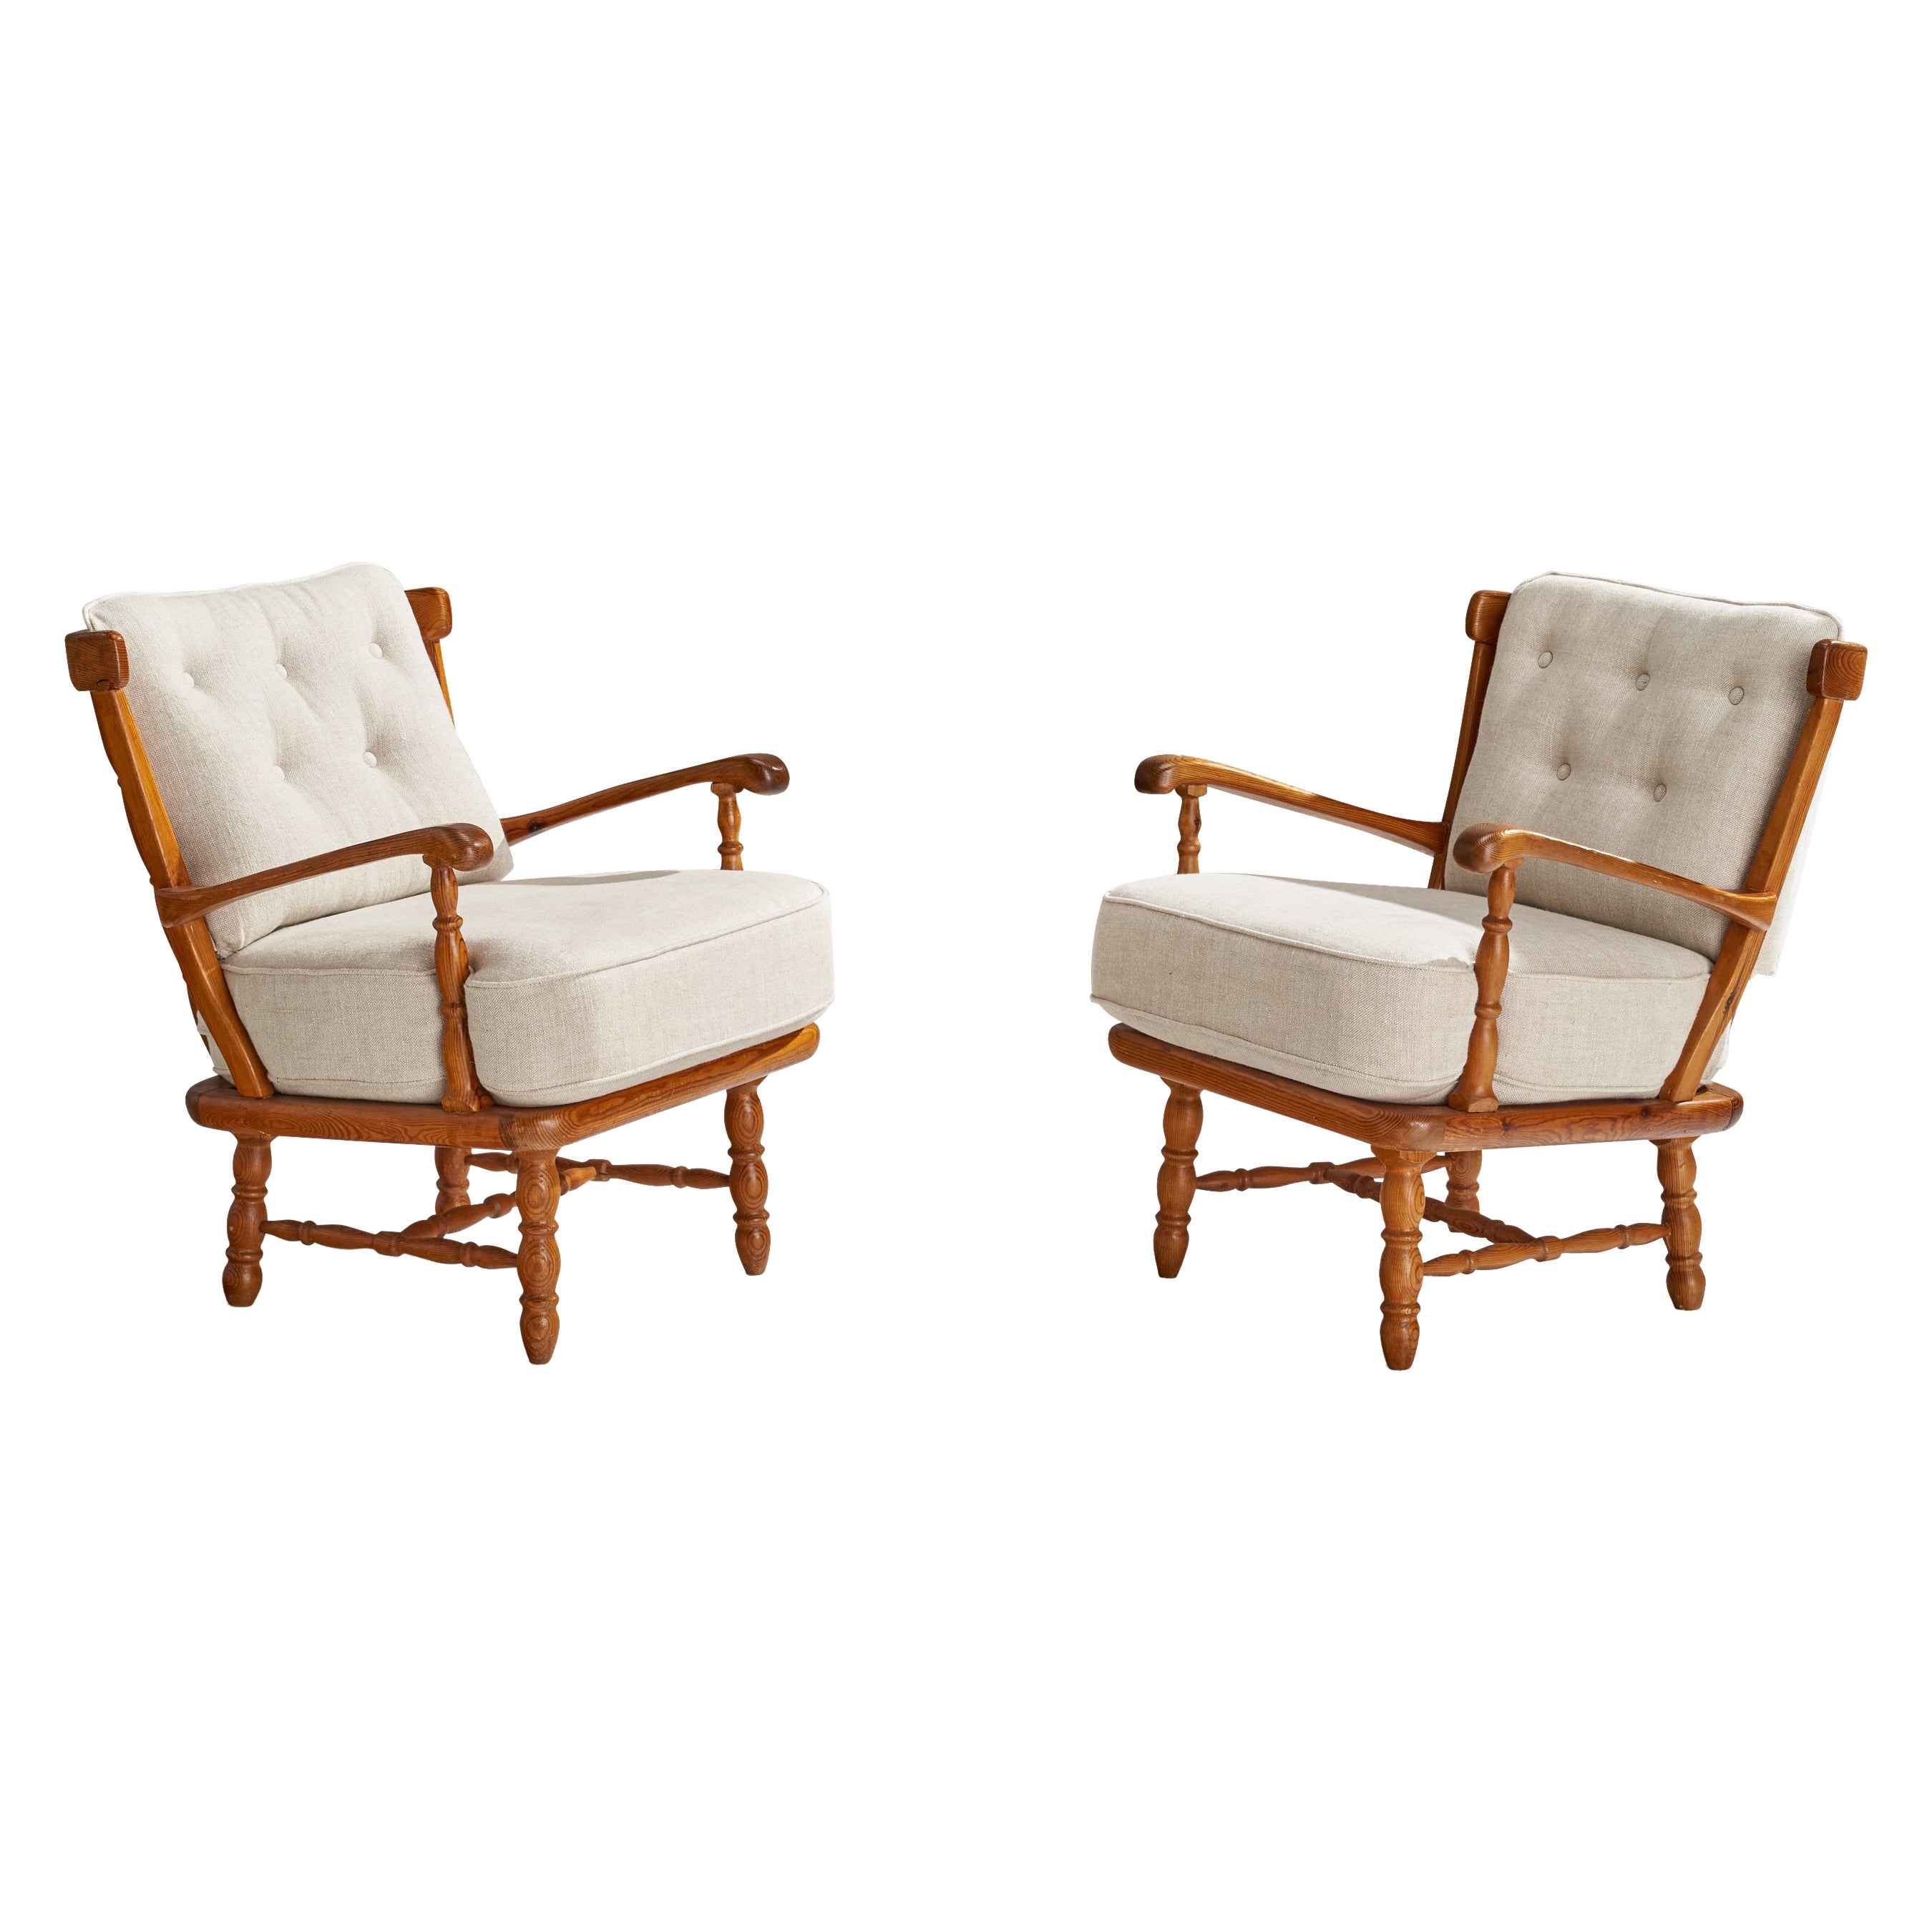 Göperts, Lounge Chairs, Pine, Fabric, Sweden, 1950s For Sale